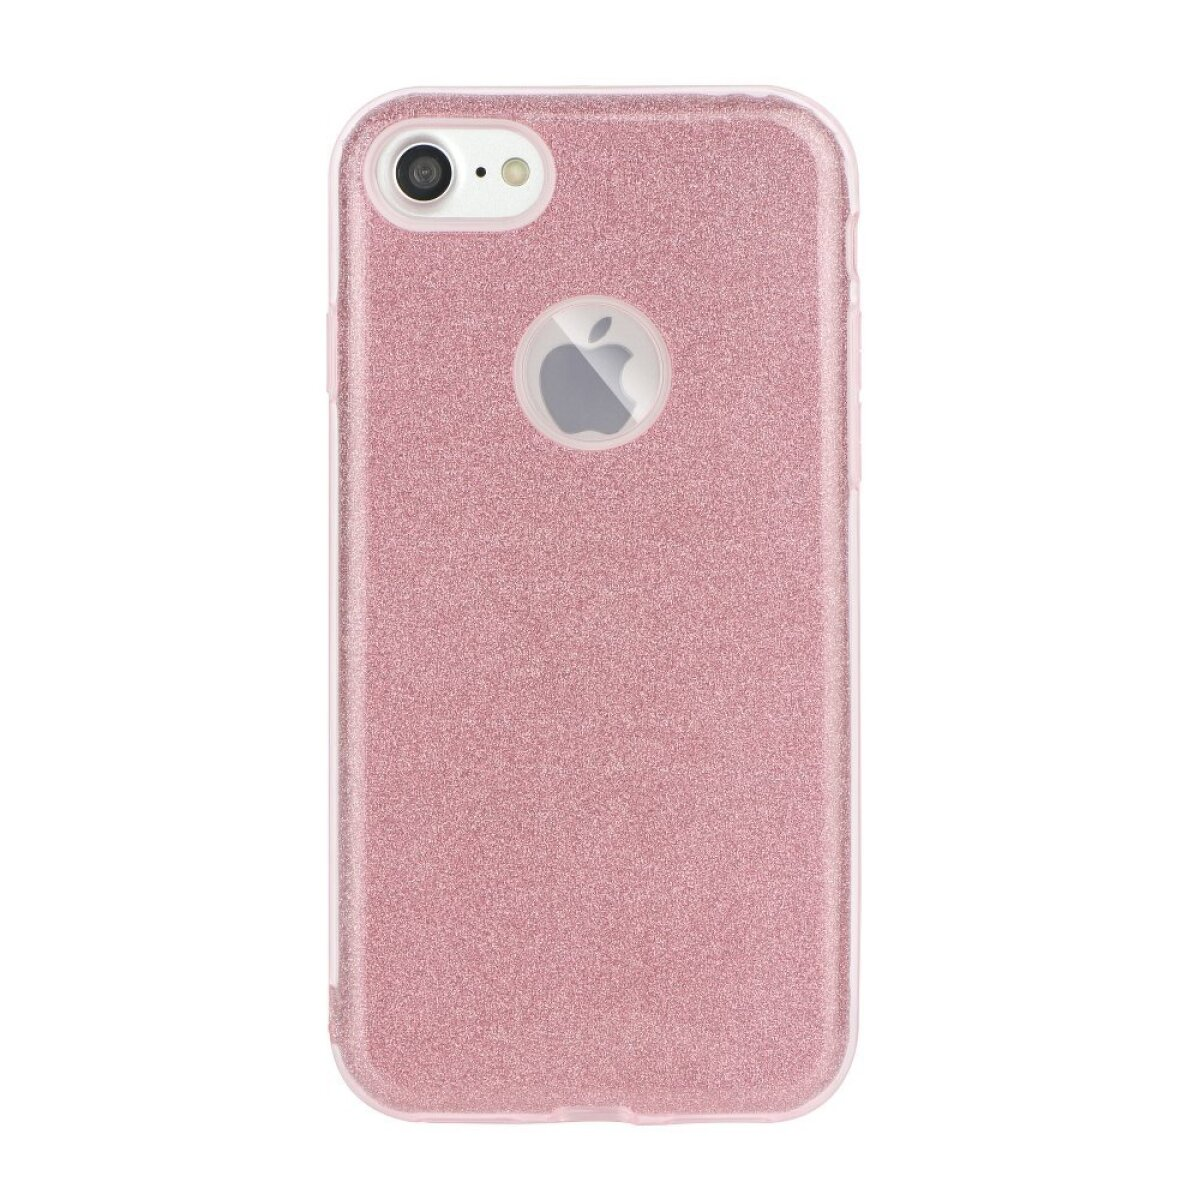 P40 FORCELL Lite, Huawei, P40 Pink SHINING LITE rosa, Full Cover, Huawei